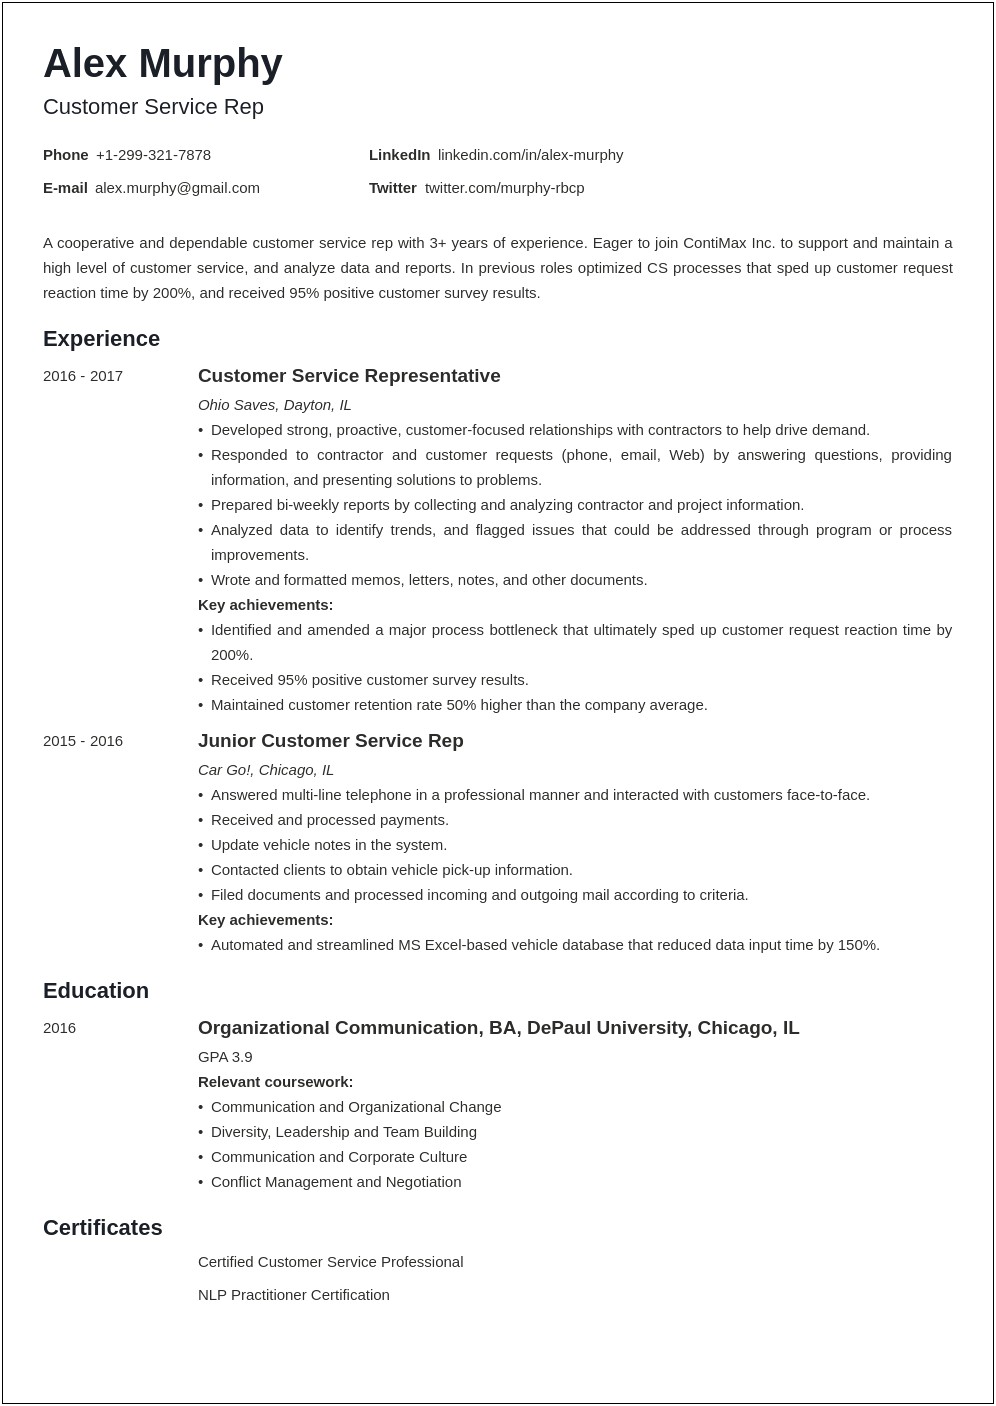 Where To Put Coursework On Resume